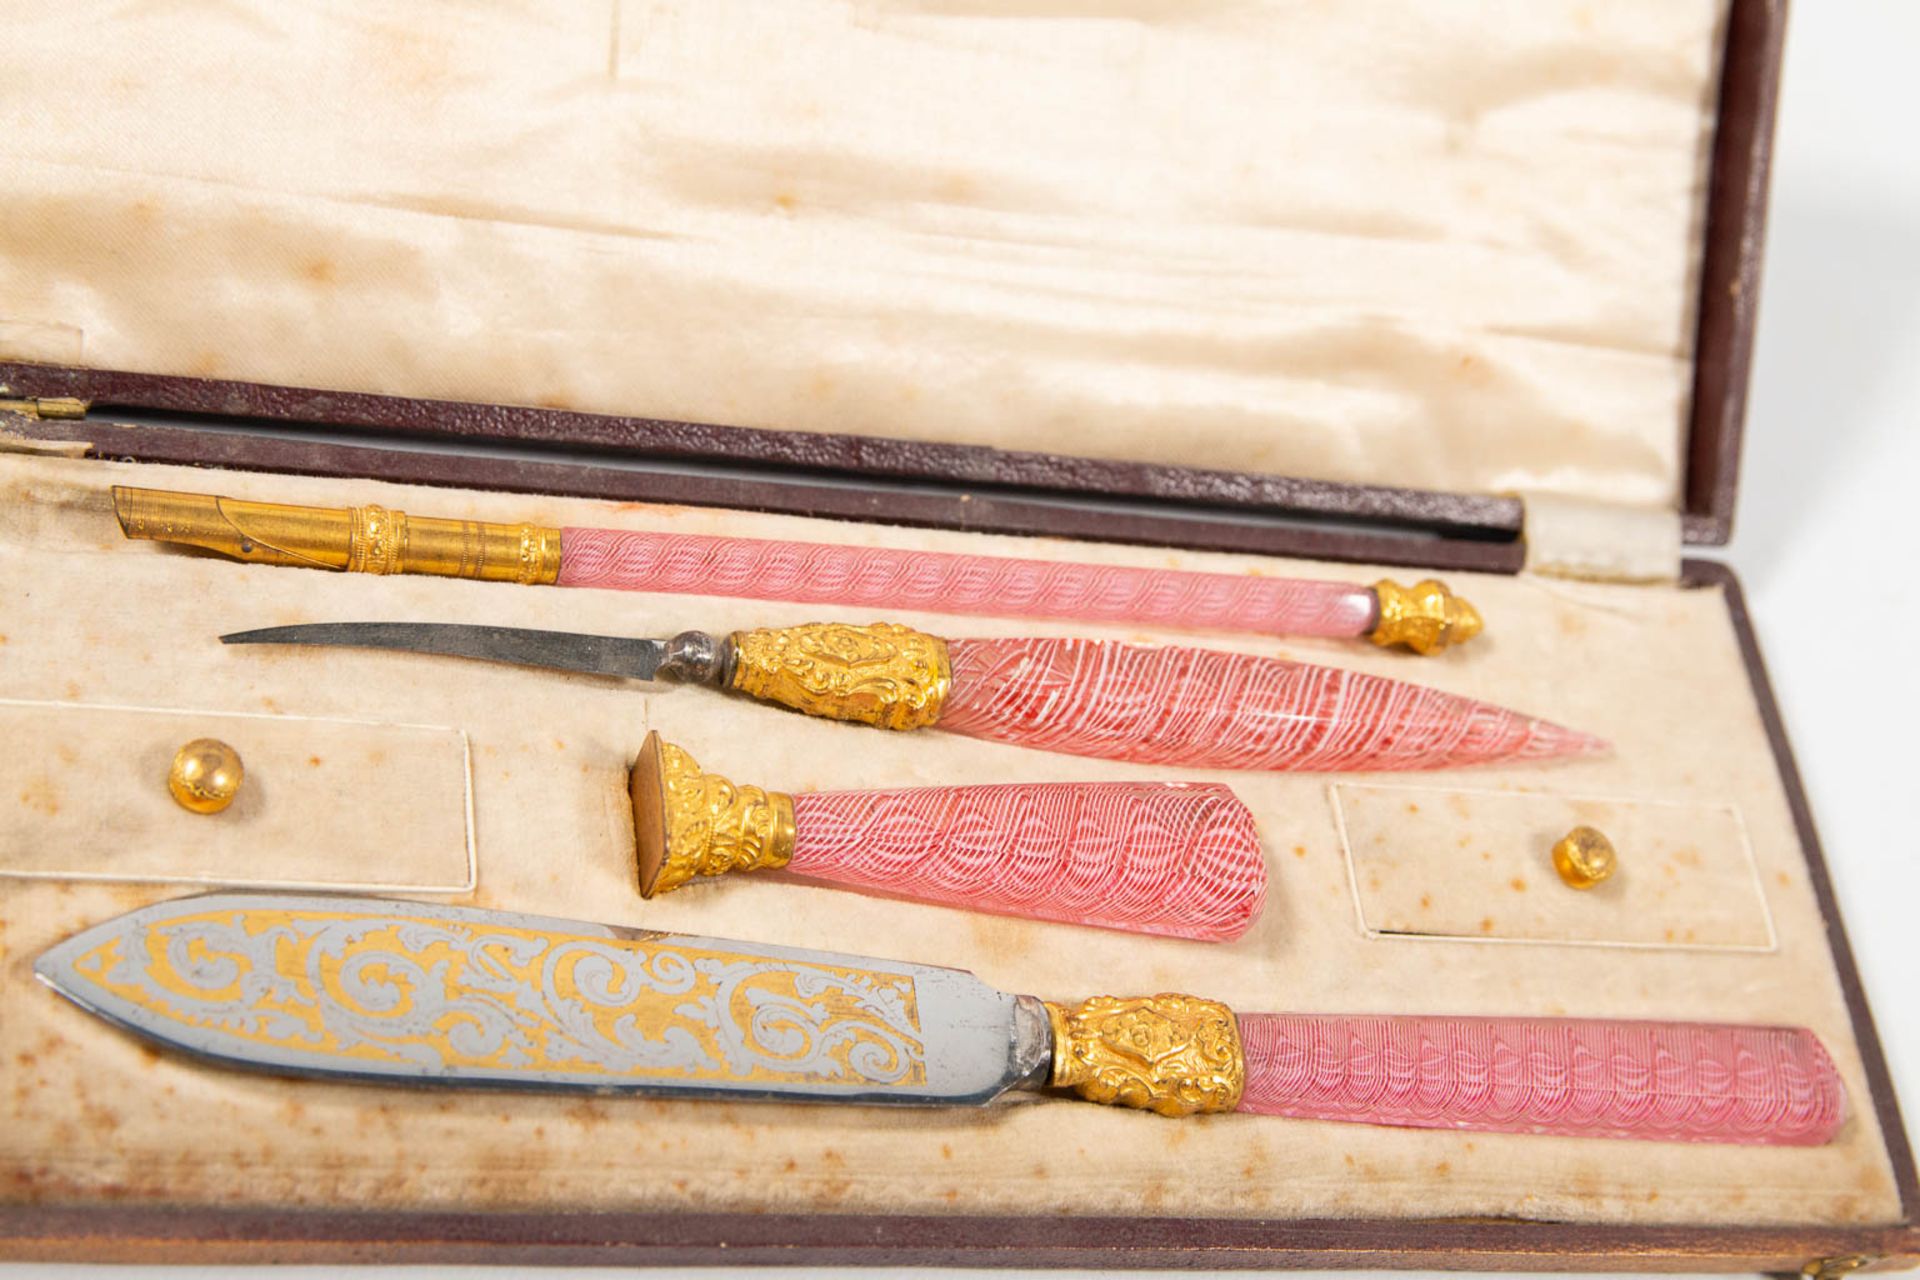 A collection of writing instruments in a case with glass handles, and made in Murano, Italy around 1 - Image 13 of 15